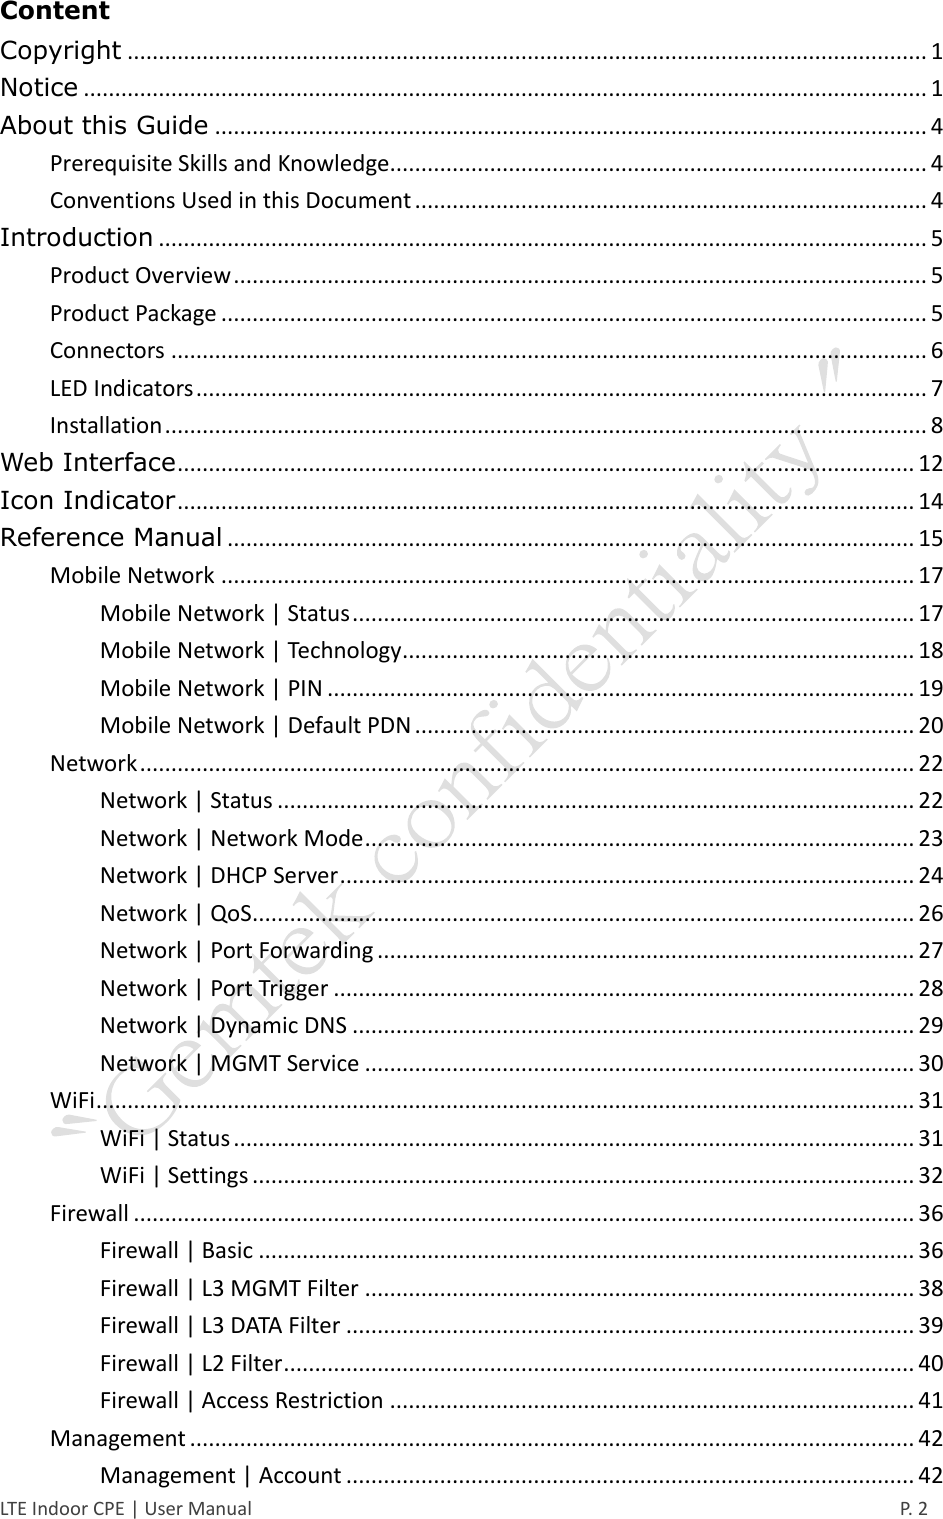  LTE Indoor CPE | User Manual      P. 2 Content Copyright ................................................................................................................................ 1 Notice ....................................................................................................................................... 1 About this Guide .................................................................................................................. 4 Prerequisite Skills and Knowledge...................................................................................... 4 Conventions Used in this Document .................................................................................. 4 Introduction ........................................................................................................................... 5 Product Overview ............................................................................................................... 5 Product Package ................................................................................................................. 5 Connectors ......................................................................................................................... 6 LED Indicators ..................................................................................................................... 7 Installation .......................................................................................................................... 8 Web Interface ...................................................................................................................... 12 Icon Indicator ...................................................................................................................... 14 Reference Manual .............................................................................................................. 15 Mobile Network ............................................................................................................... 17 Mobile Network | Status .......................................................................................... 17 Mobile Network | Technology.................................................................................. 18 Mobile Network | PIN .............................................................................................. 19 Mobile Network | Default PDN ................................................................................ 20 Network ............................................................................................................................ 22 Network | Status ...................................................................................................... 22 Network | Network Mode ........................................................................................ 23 Network | DHCP Server ............................................................................................ 24 Network | QoS .......................................................................................................... 26 Network | Port Forwarding ...................................................................................... 27 Network | Port Trigger ............................................................................................. 28 Network | Dynamic DNS .......................................................................................... 29 Network | MGMT Service ........................................................................................ 30 WiFi ................................................................................................................................... 31 WiFi | Status ............................................................................................................. 31 WiFi | Settings .......................................................................................................... 32 Firewall ............................................................................................................................. 36 Firewall | Basic ......................................................................................................... 36 Firewall | L3 MGMT Filter ........................................................................................ 38 Firewall | L3 DATA Filter ........................................................................................... 39 Firewall | L2 Filter ..................................................................................................... 40 Firewall | Access Restriction .................................................................................... 41 Management .................................................................................................................... 42 Management | Account ........................................................................................... 42 